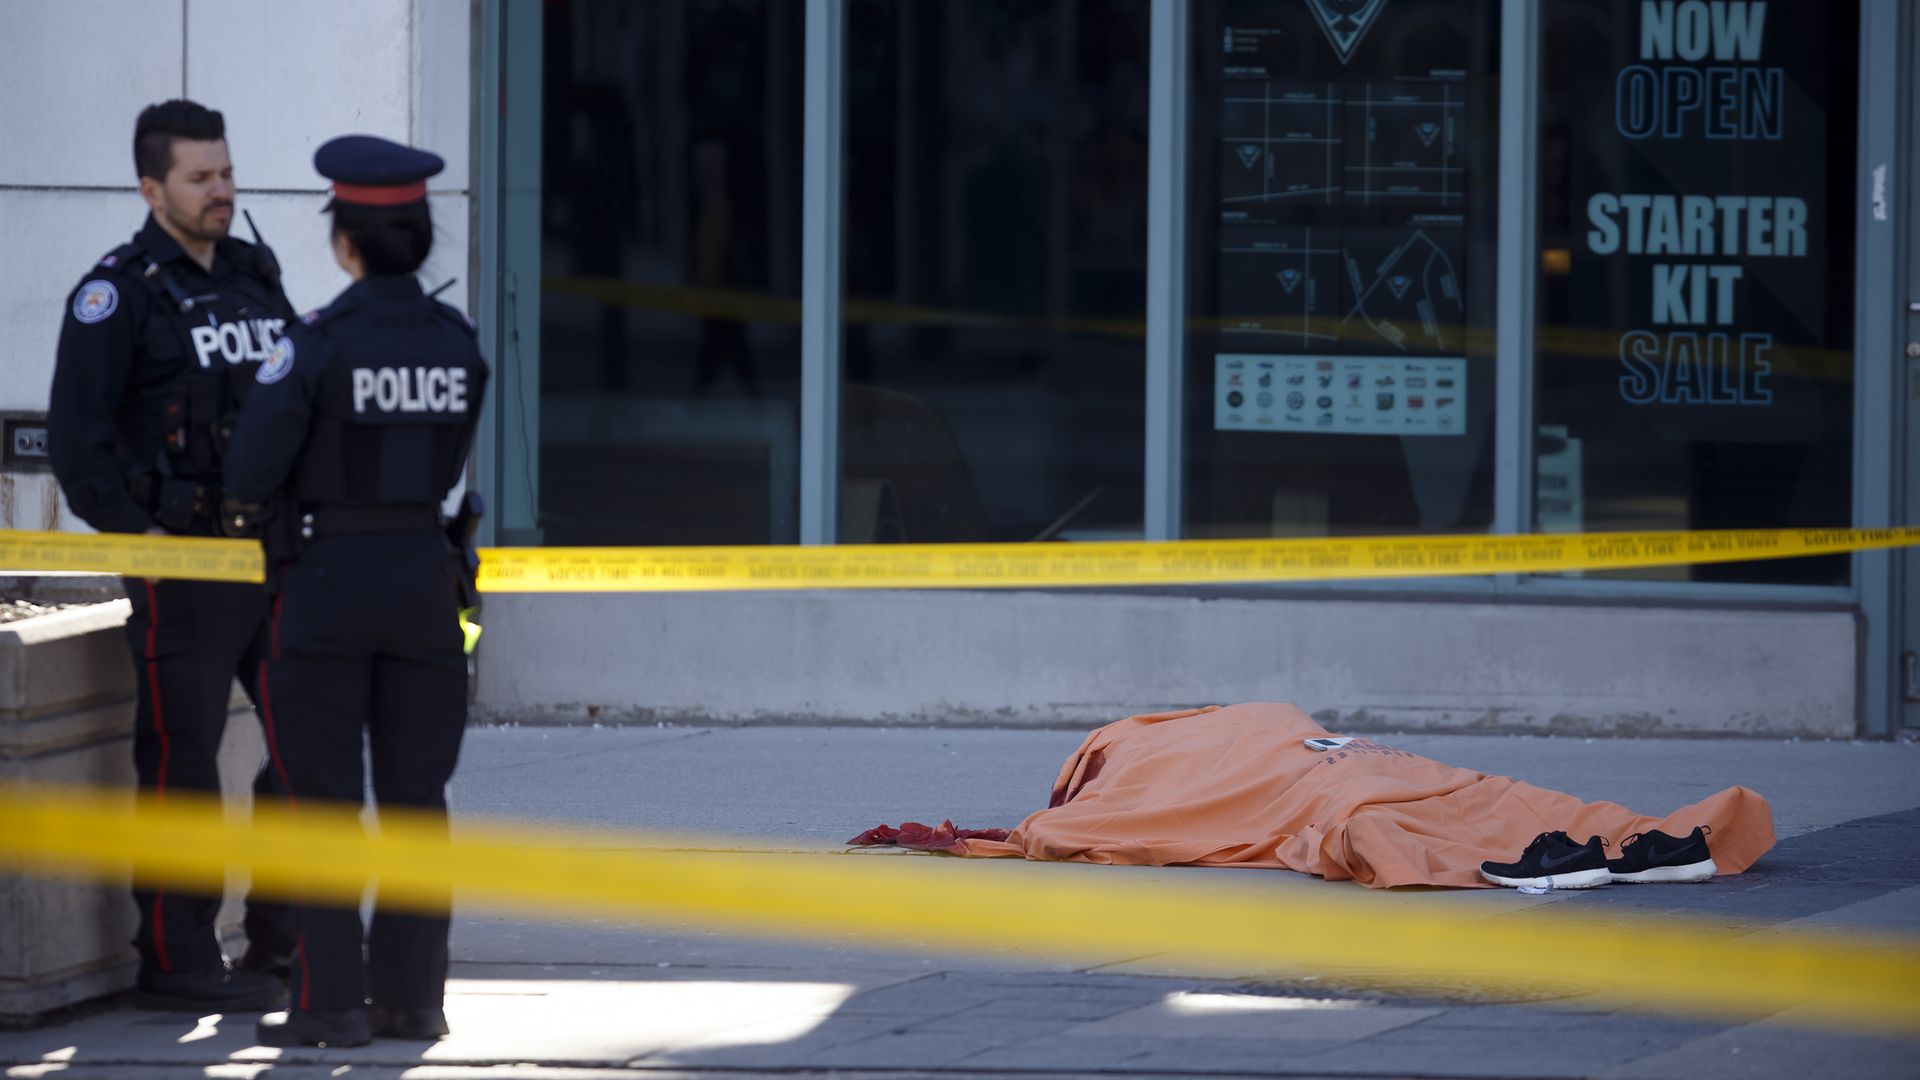 At least 10 dead, 15 injured after van hits pedestrians in Toronto - Axios1920 x 1080